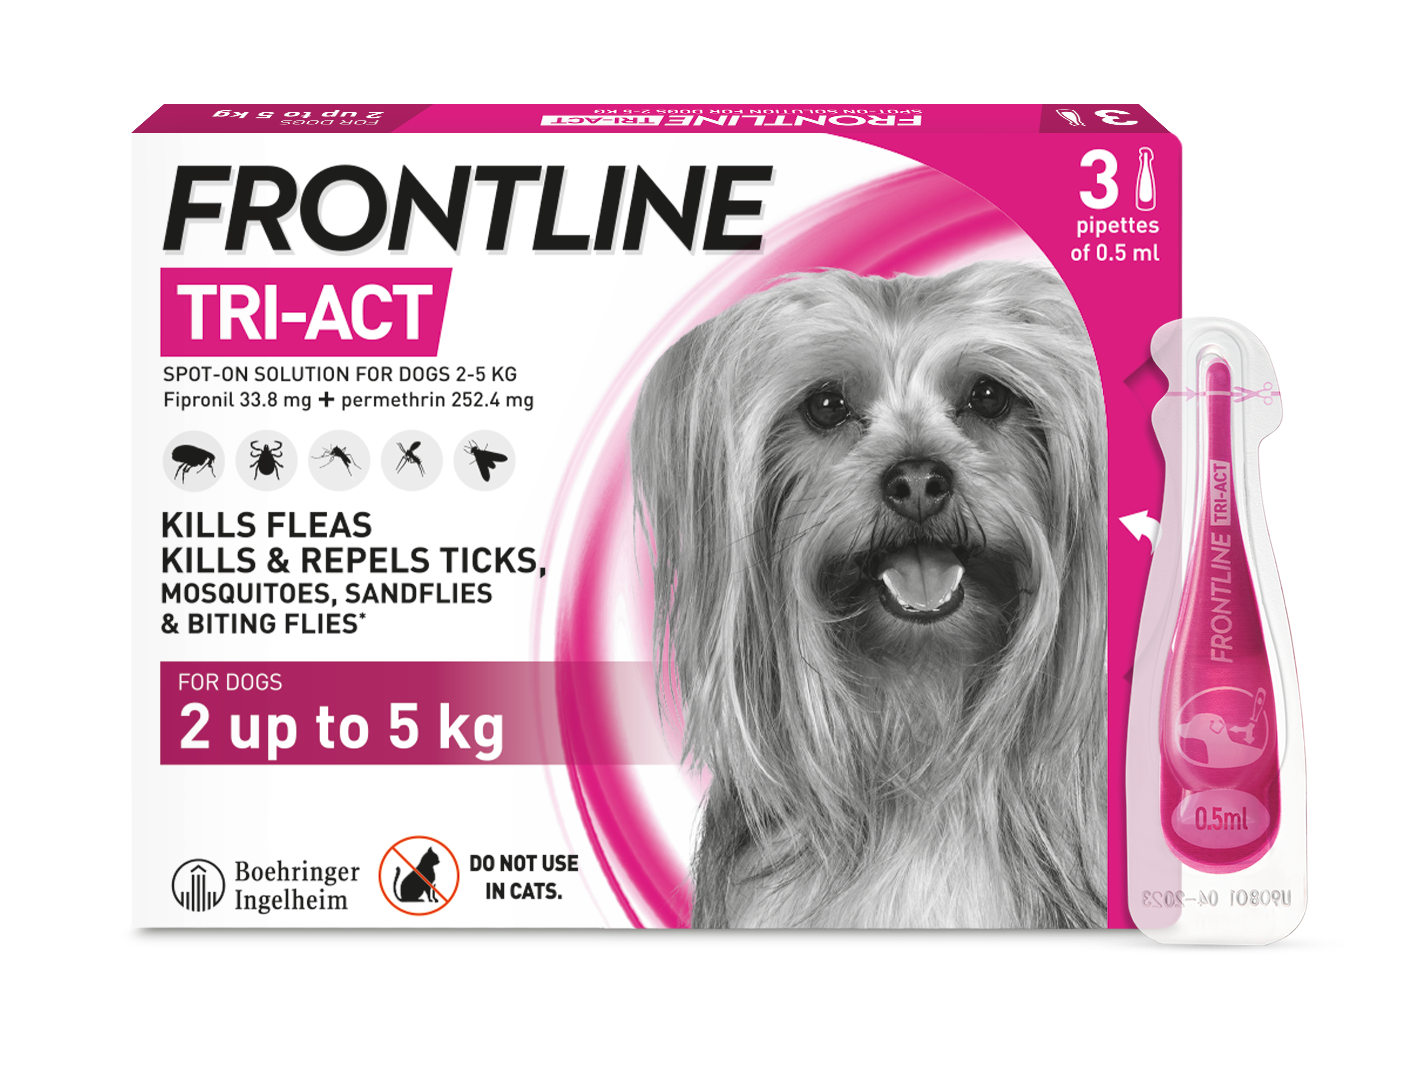 FRONTLINE TRI-ACT DOG PRODUCT